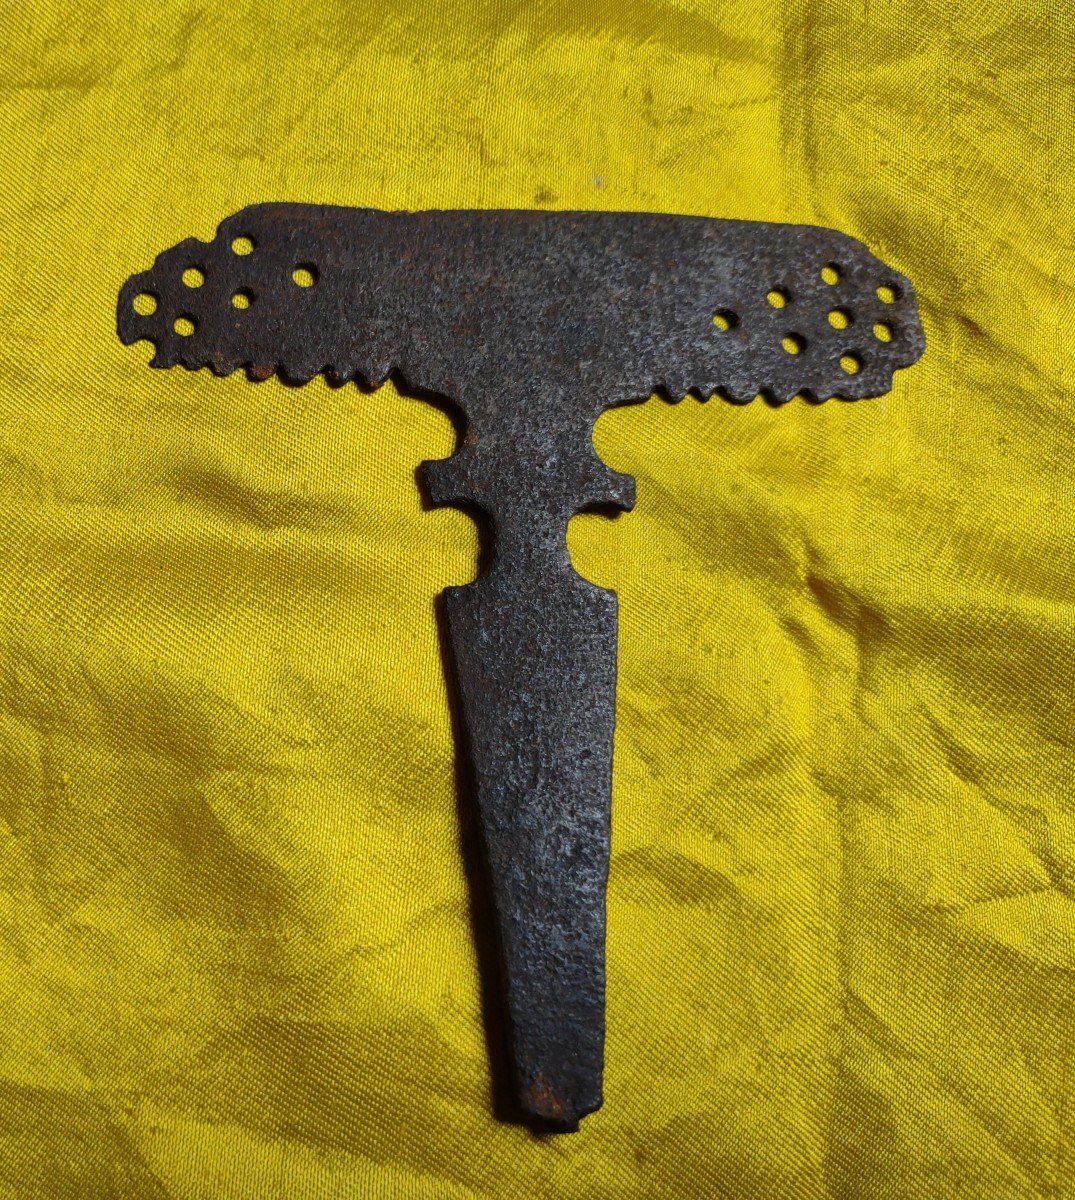 Rarity 2 Wrought Iron Tools For Scraping Leather-photo-3